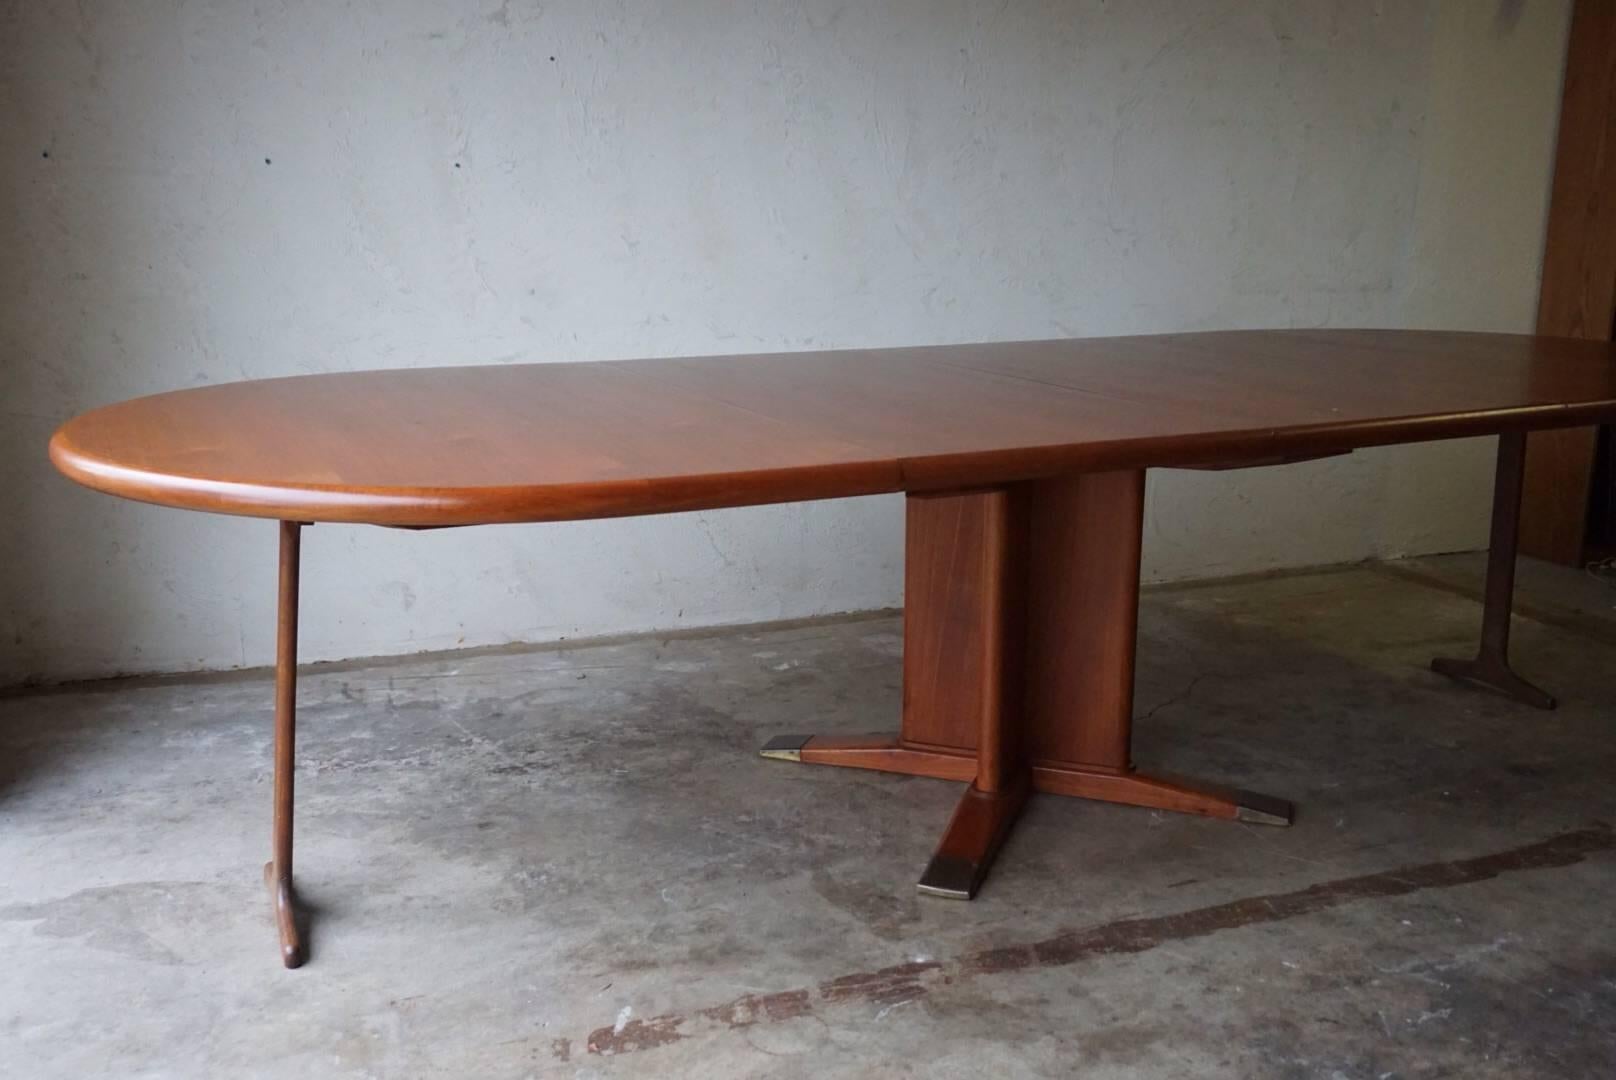 Exceptional dining table, solid teak, on a four-star pedestal base with brass leg caps designed by Frits Henningsen. This is a stunning piece. Included is two leaves making the table 113" long.